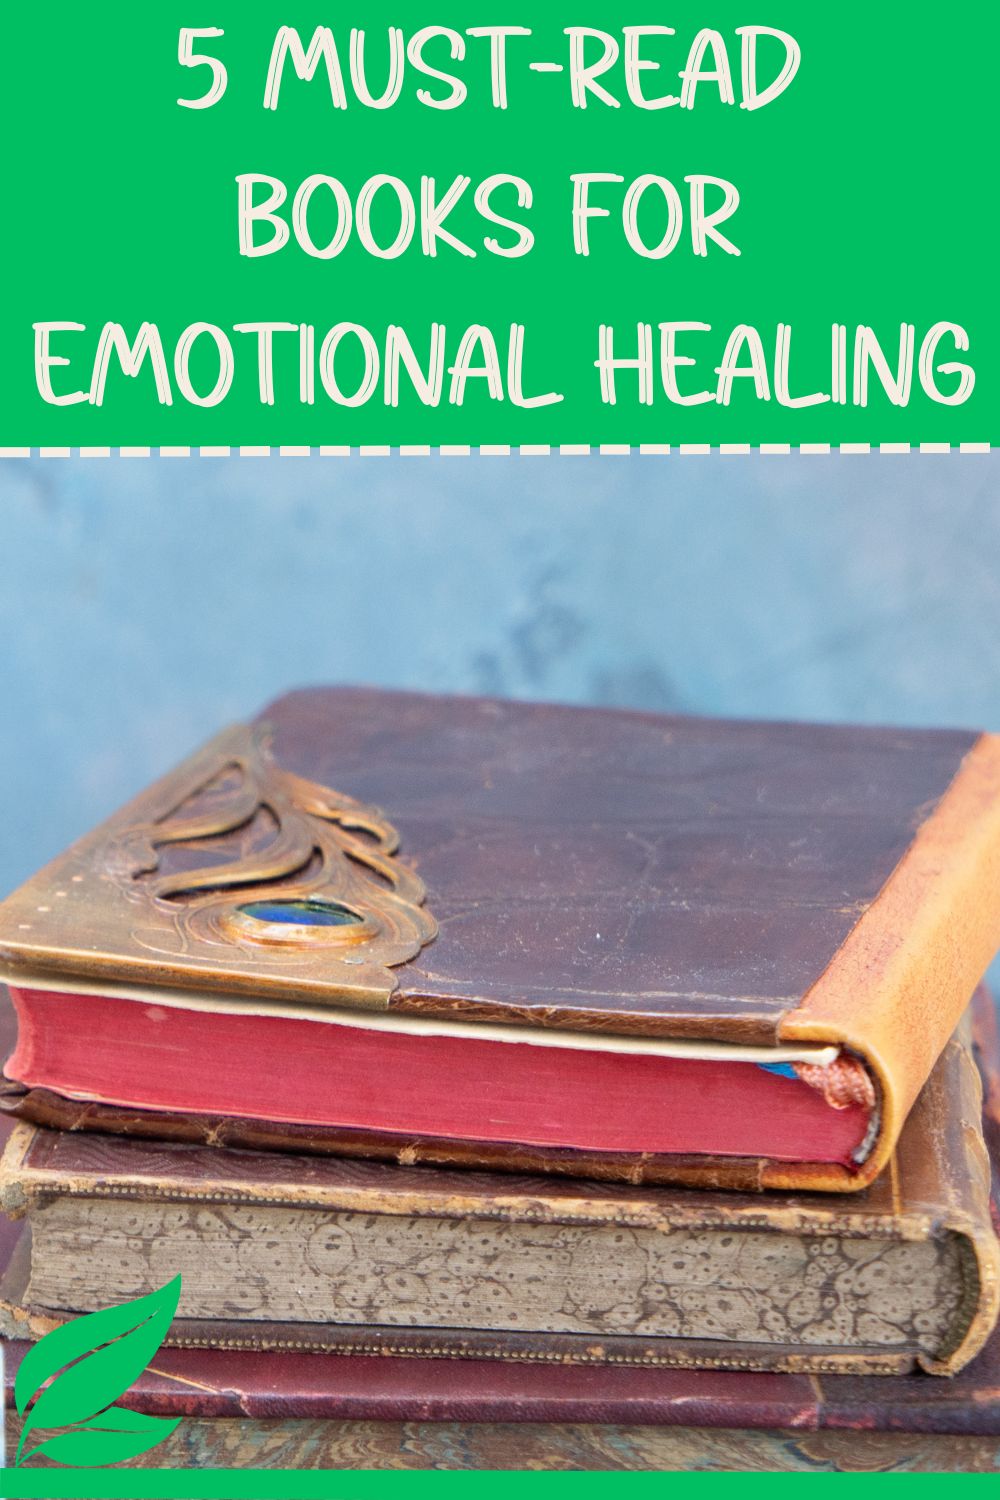 5 must-read books for emotional healing.